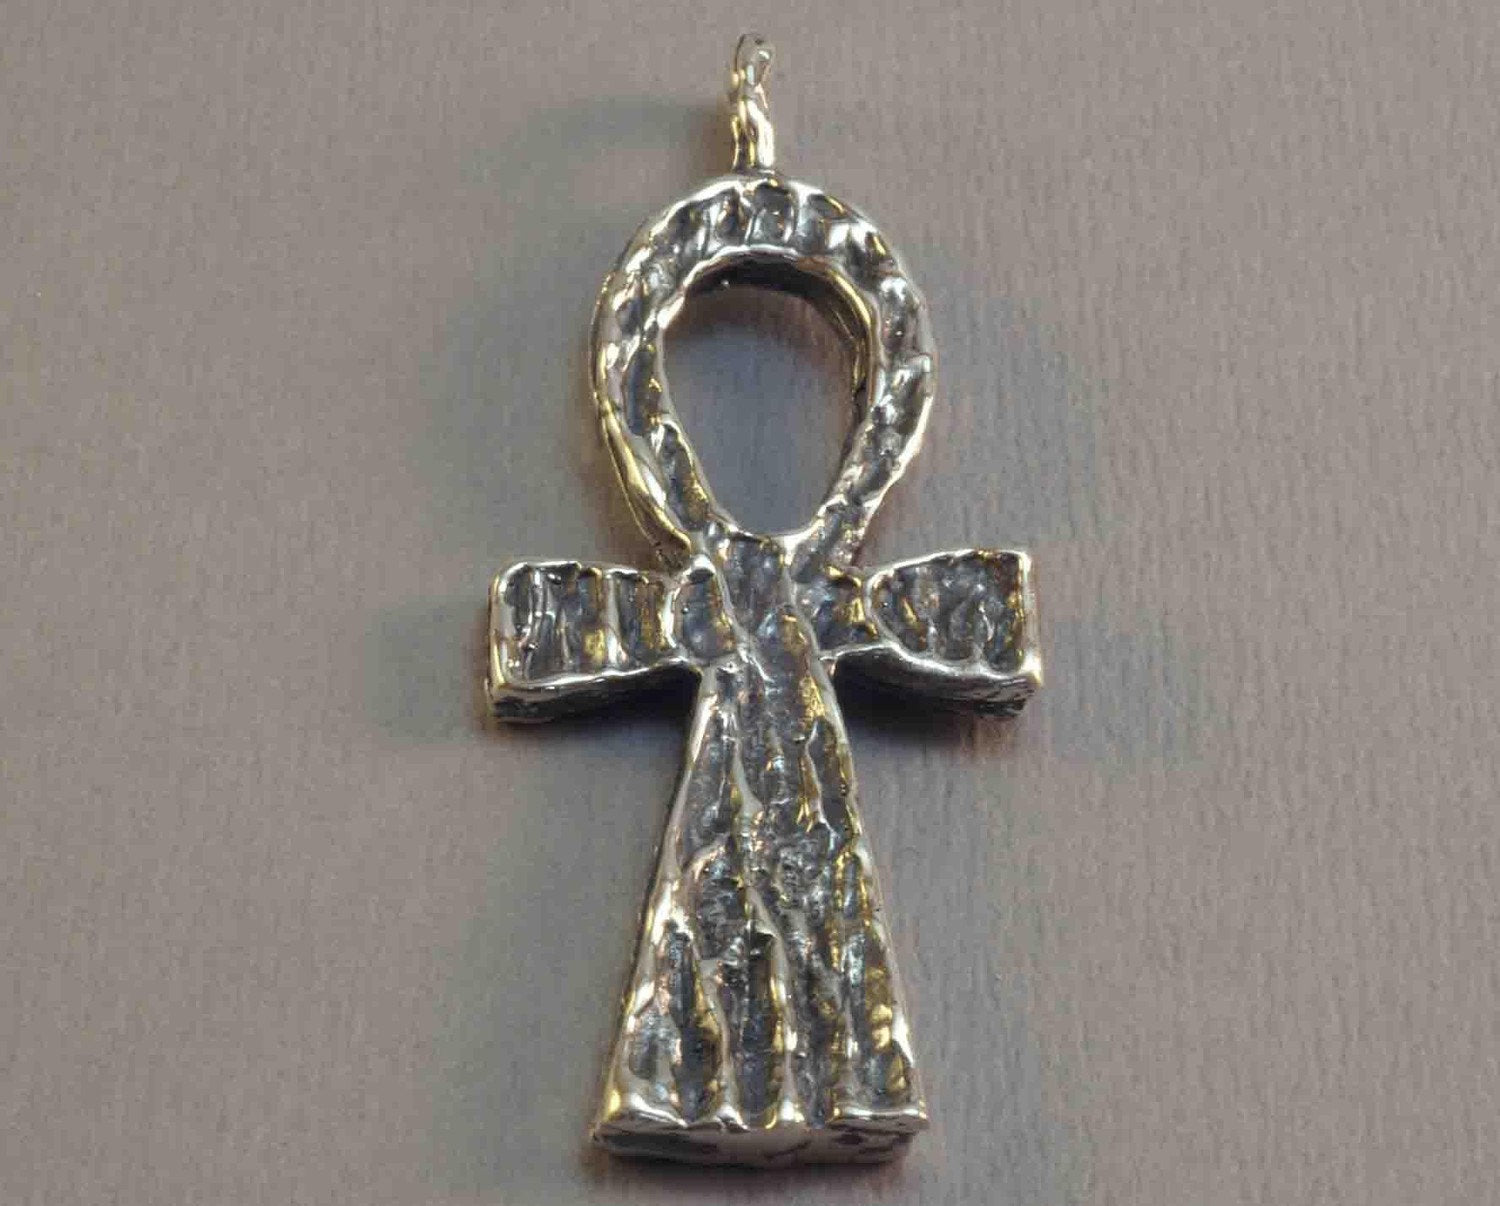 Large Textured Ankh Pendant in Sterling Silver or Antique Bronze, Sterling Silver Ankh Pendant, Antique Bronze Ankh Pendant, Retro Ankh Pendant, Silver Ankh Pendant, Bronze Ankh Pendant, Eternal Life Pendant, Egyptian Cross Pendant, Ancient Egyptian Jewelry, Ancient Egyptian Jewellery, Silver Goth Jewelry, Silver Goth Jewellery, Silver Egyptian Pendant, Bronze Egyptian Pendant